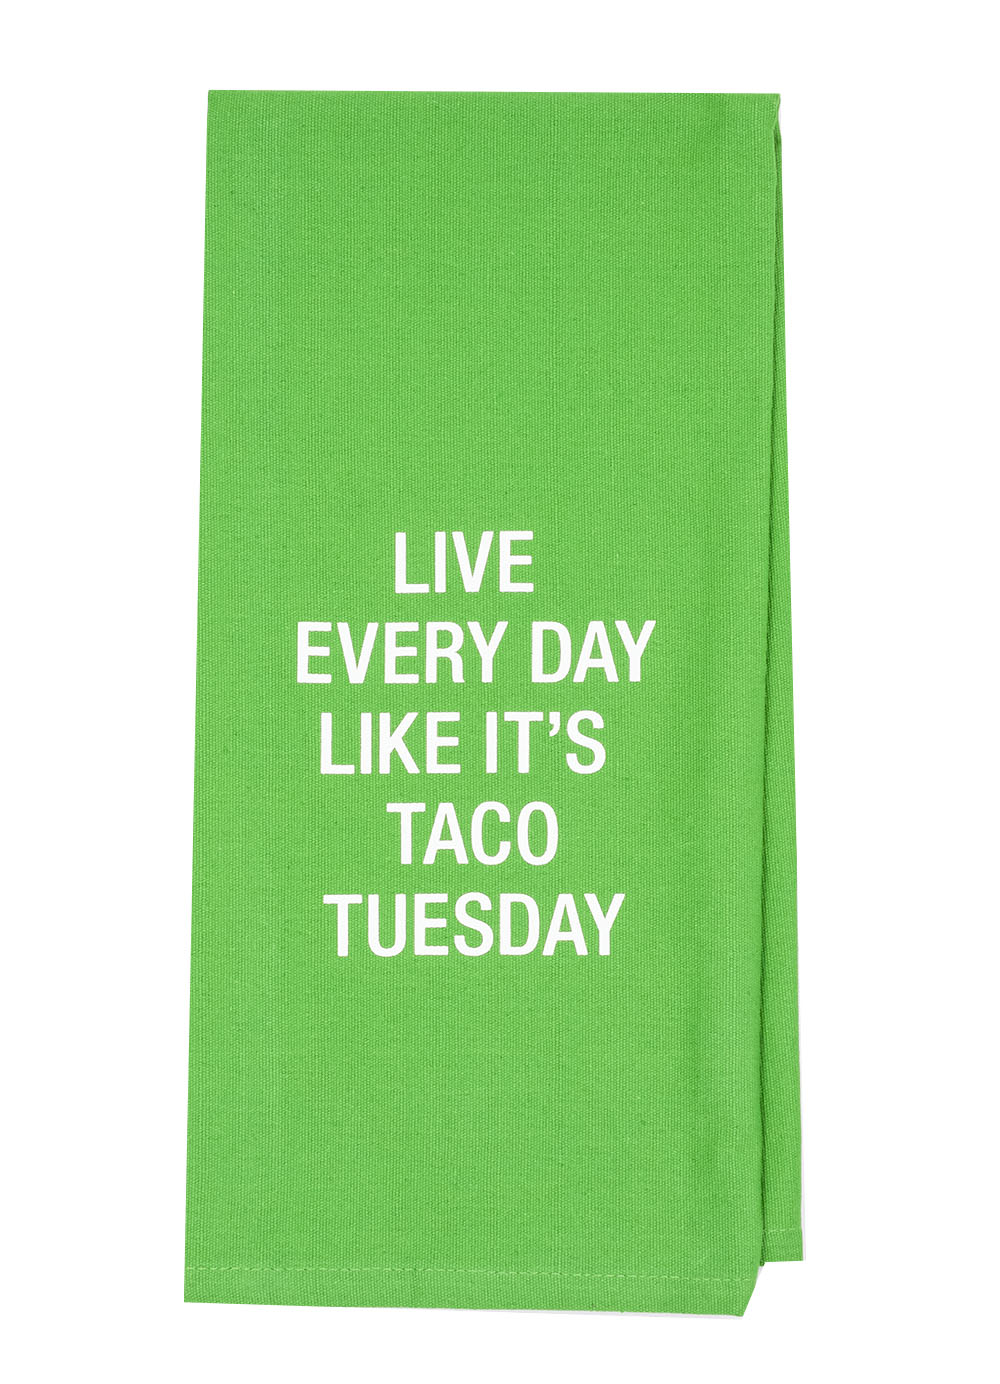 Taco Tuesday Tea Towel 
															/ About Face Designs							